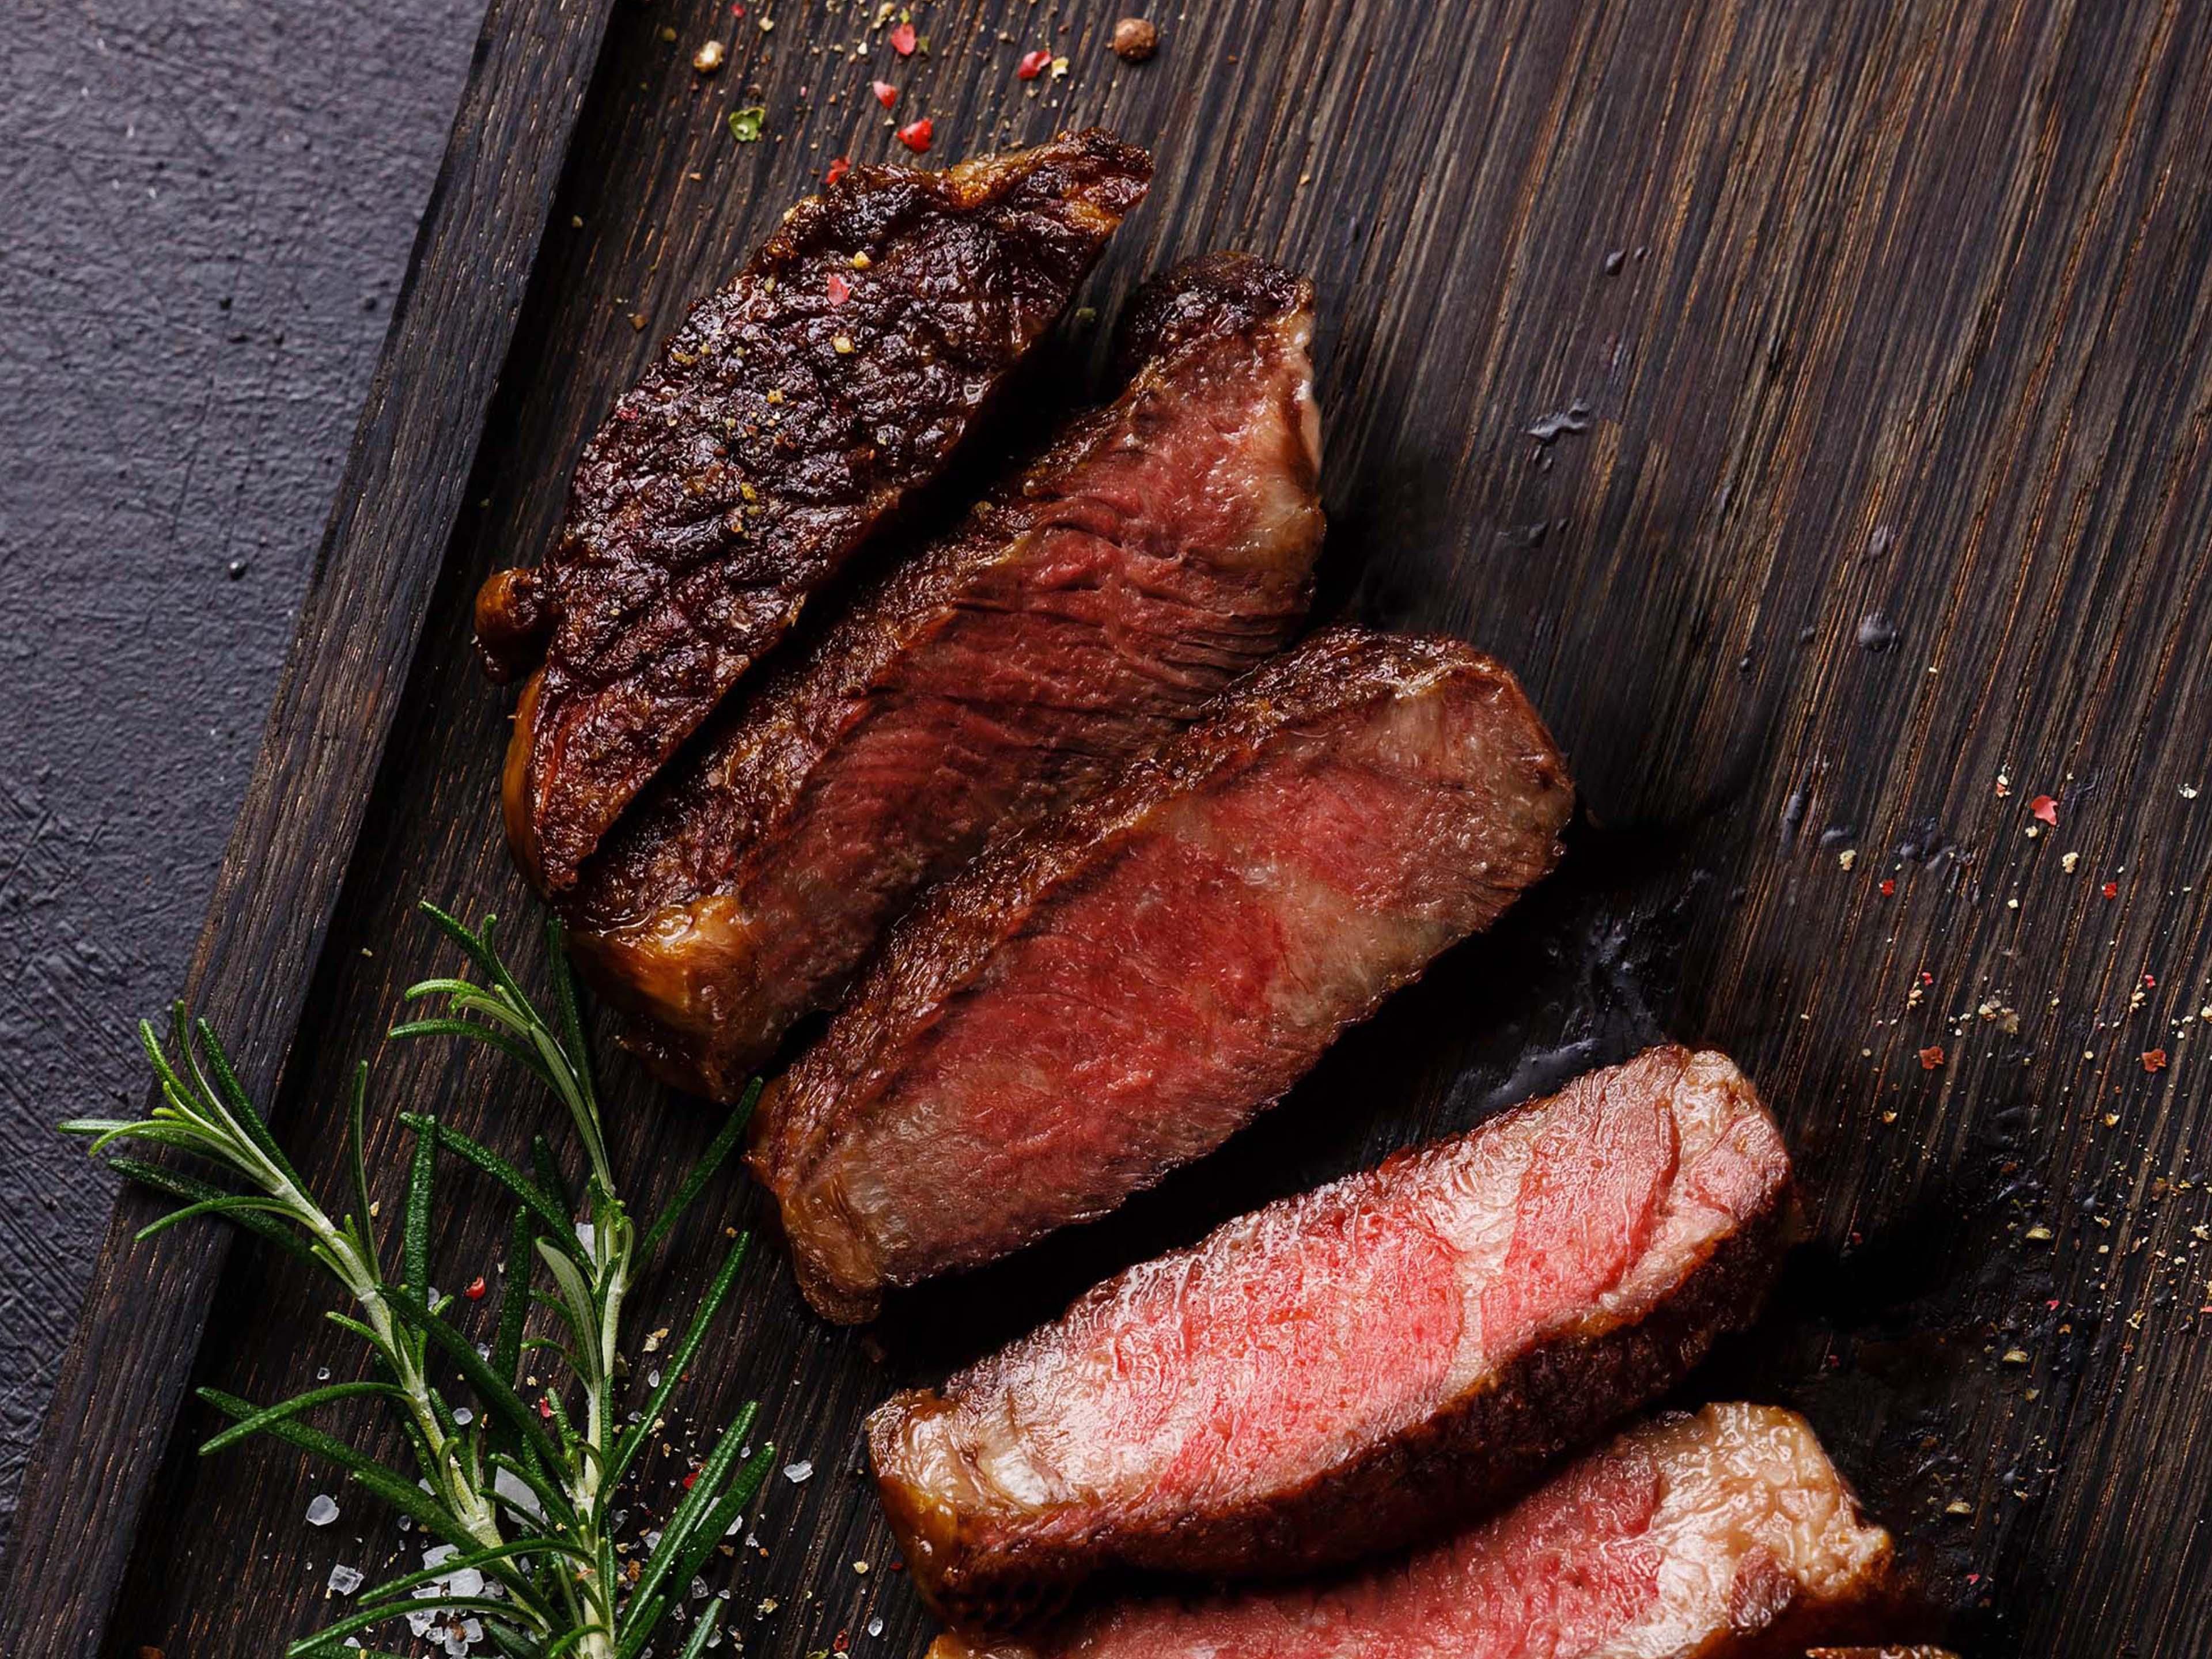 Treat Yourself to a Perfect Steak